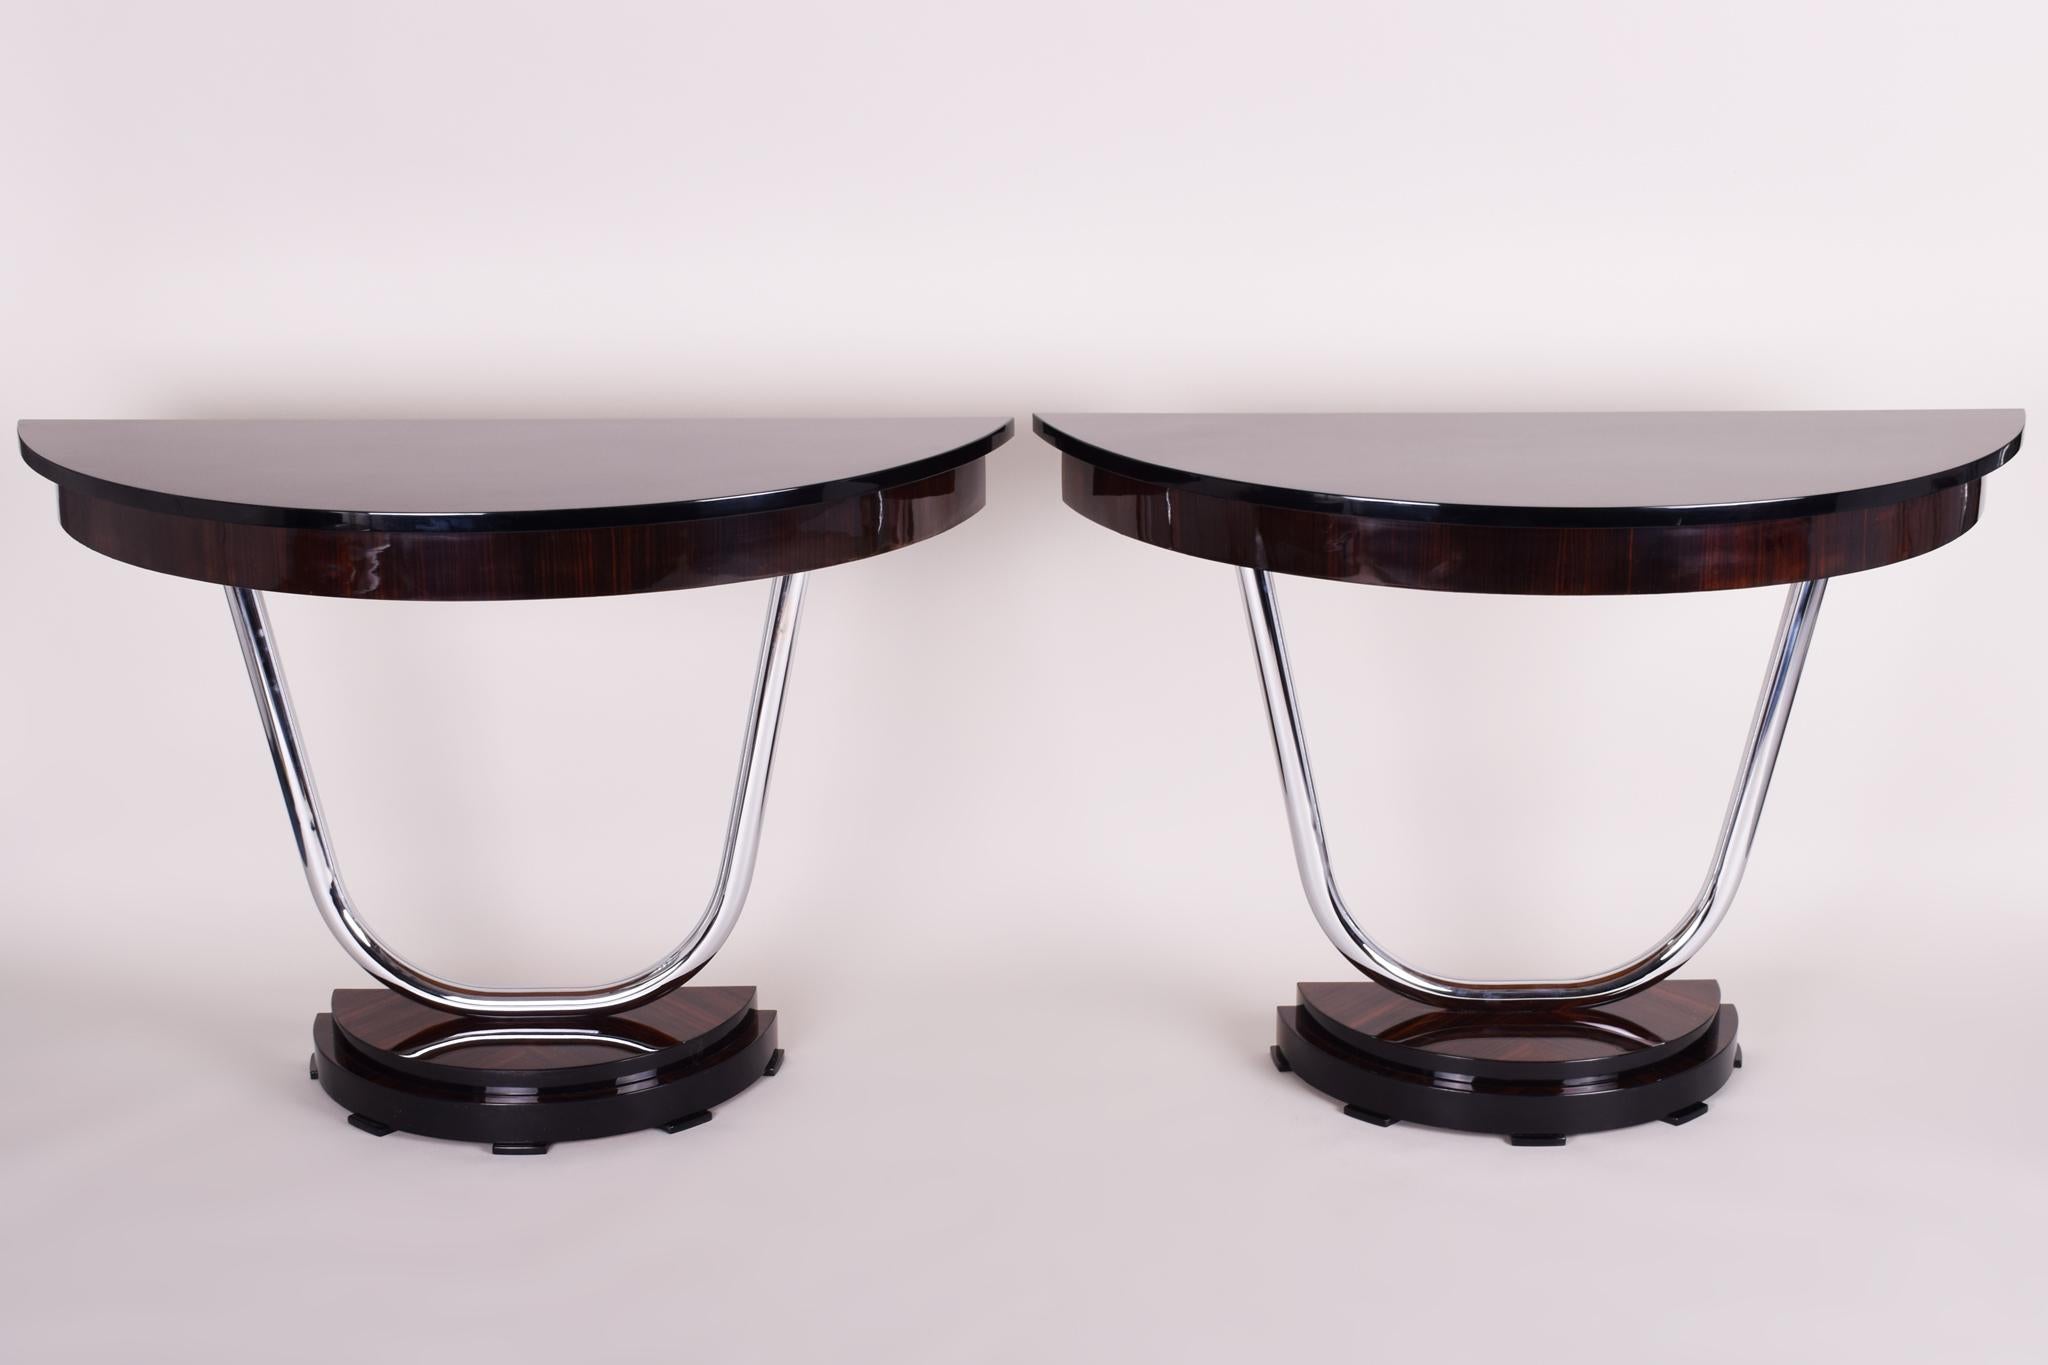 Pair of French Art Deco console tables. 
Completely restored, surface made by piano lacquers to the high gloss. 
Material: Macassar ebony veneer.